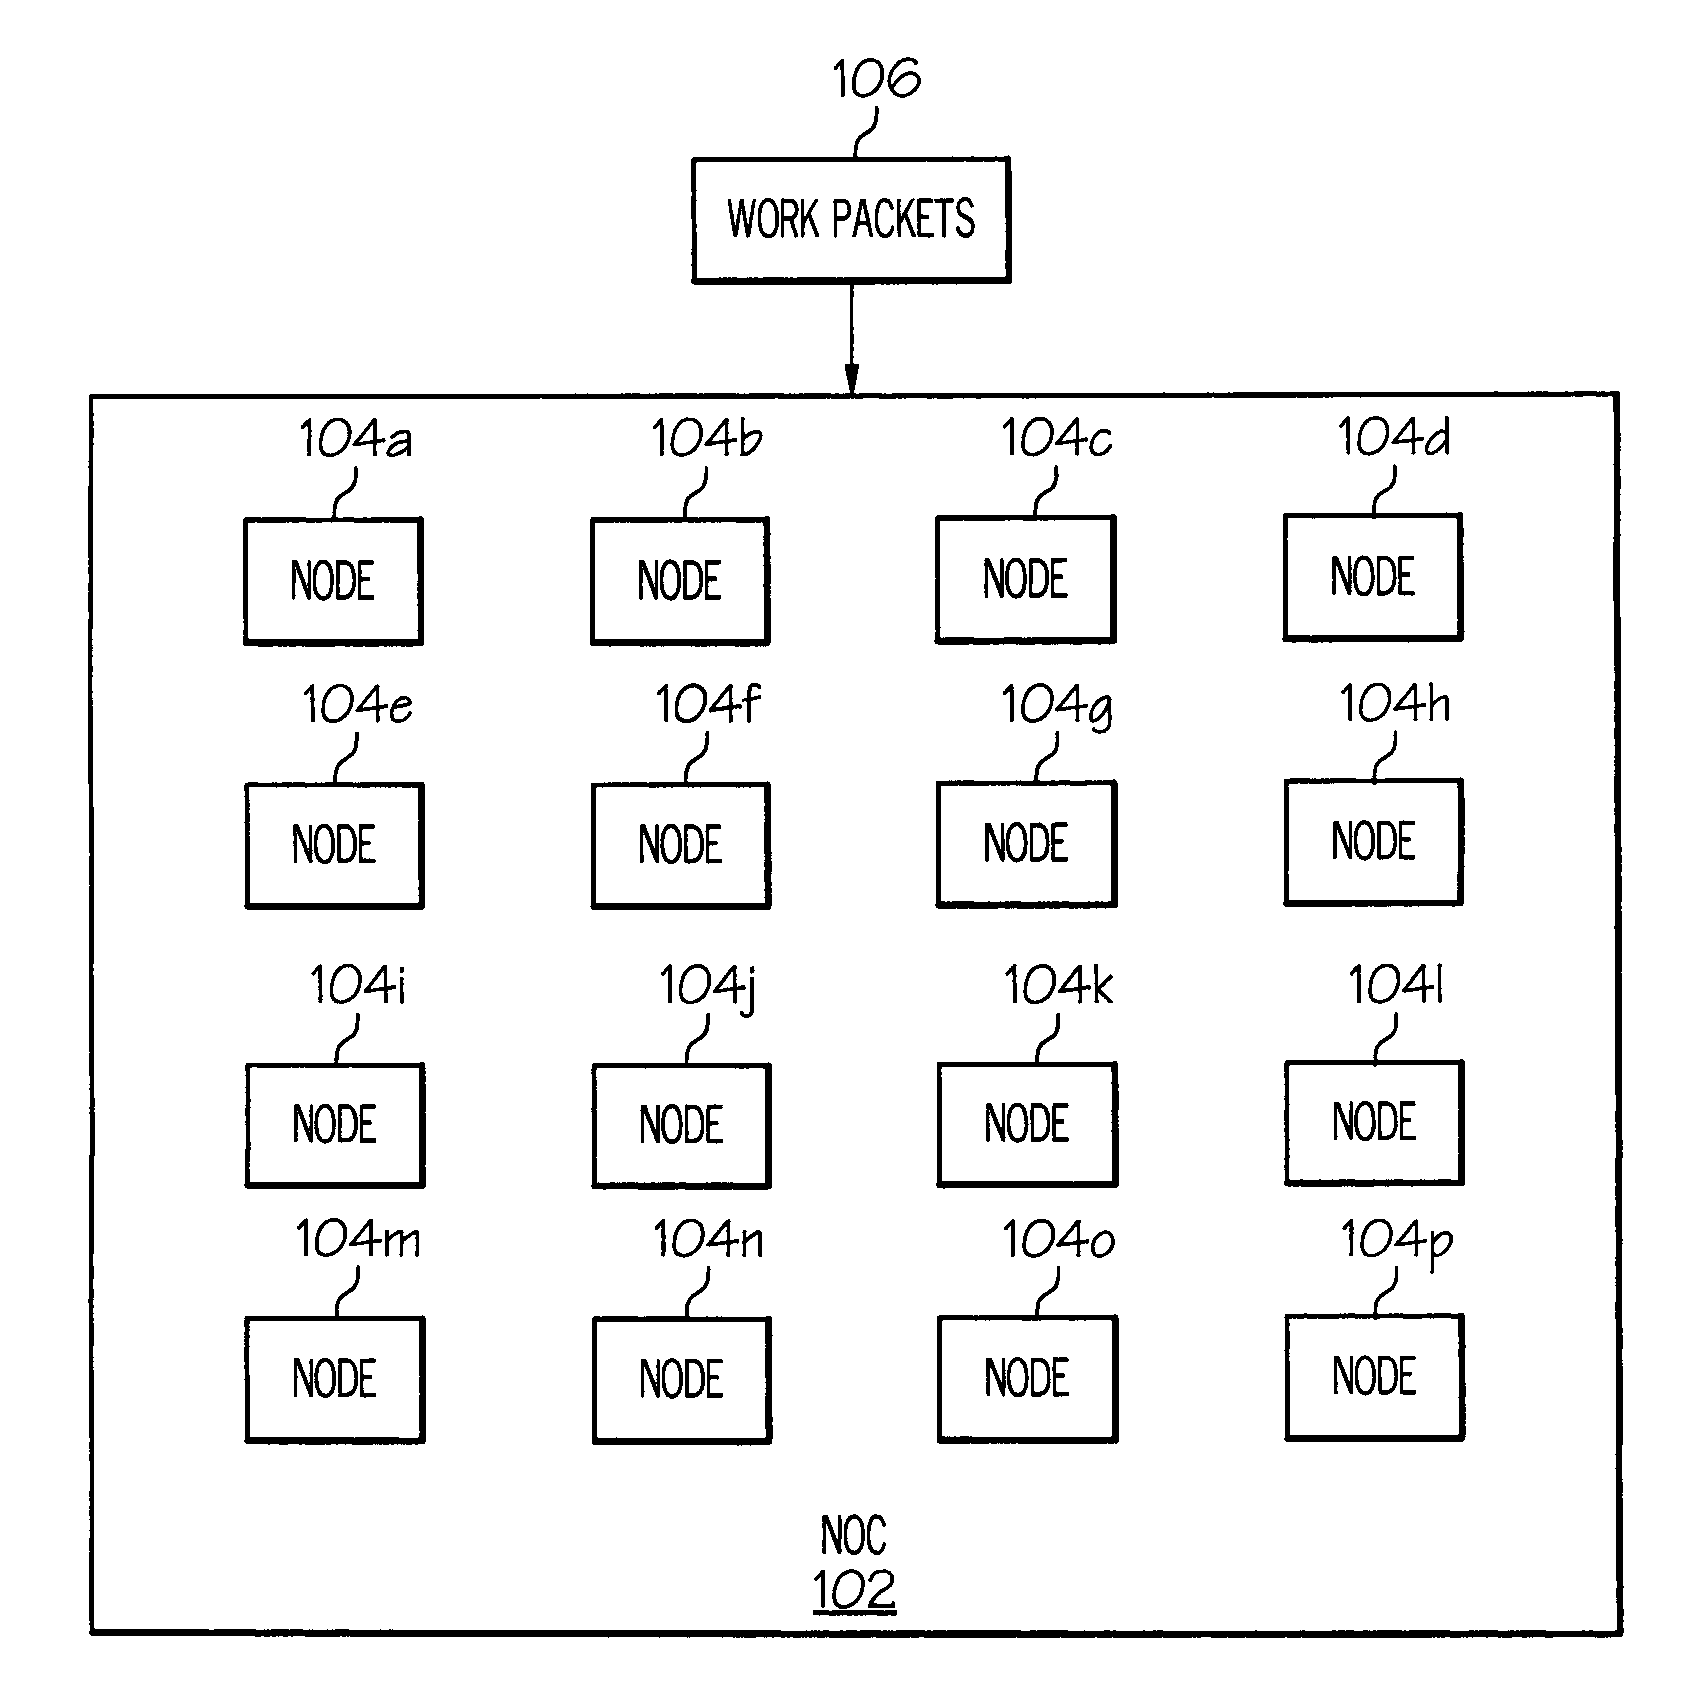 Software debugger for packets in a network on a chip